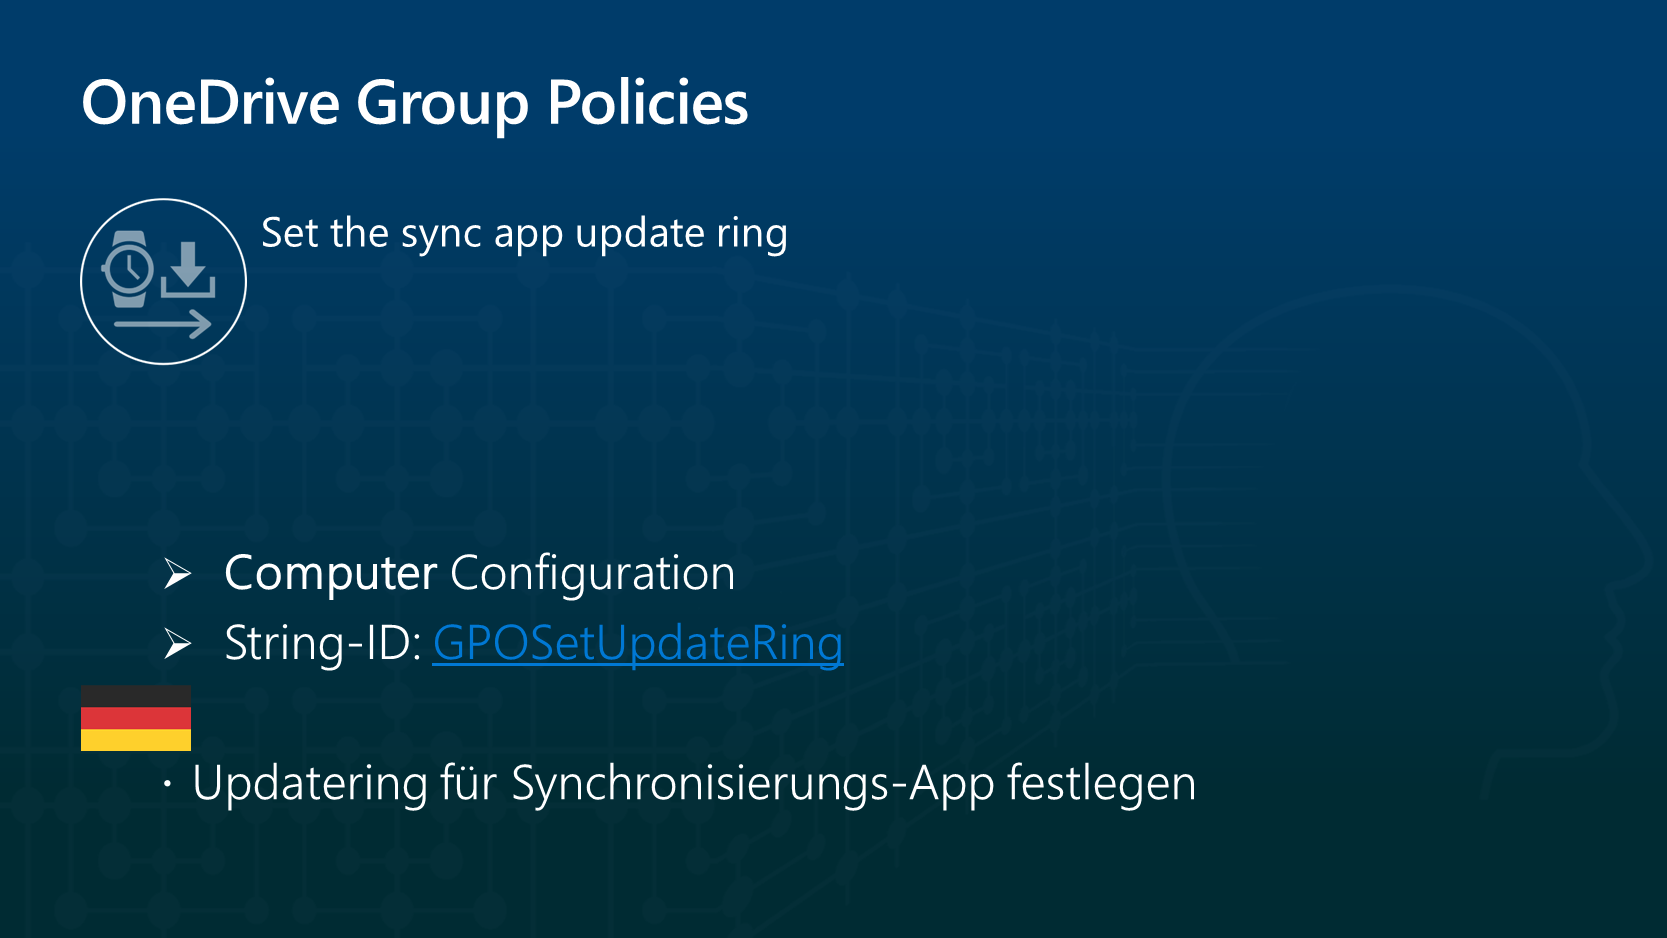 The name, the configuration and the String-ID of the Group Policy Set the sync update Ring.